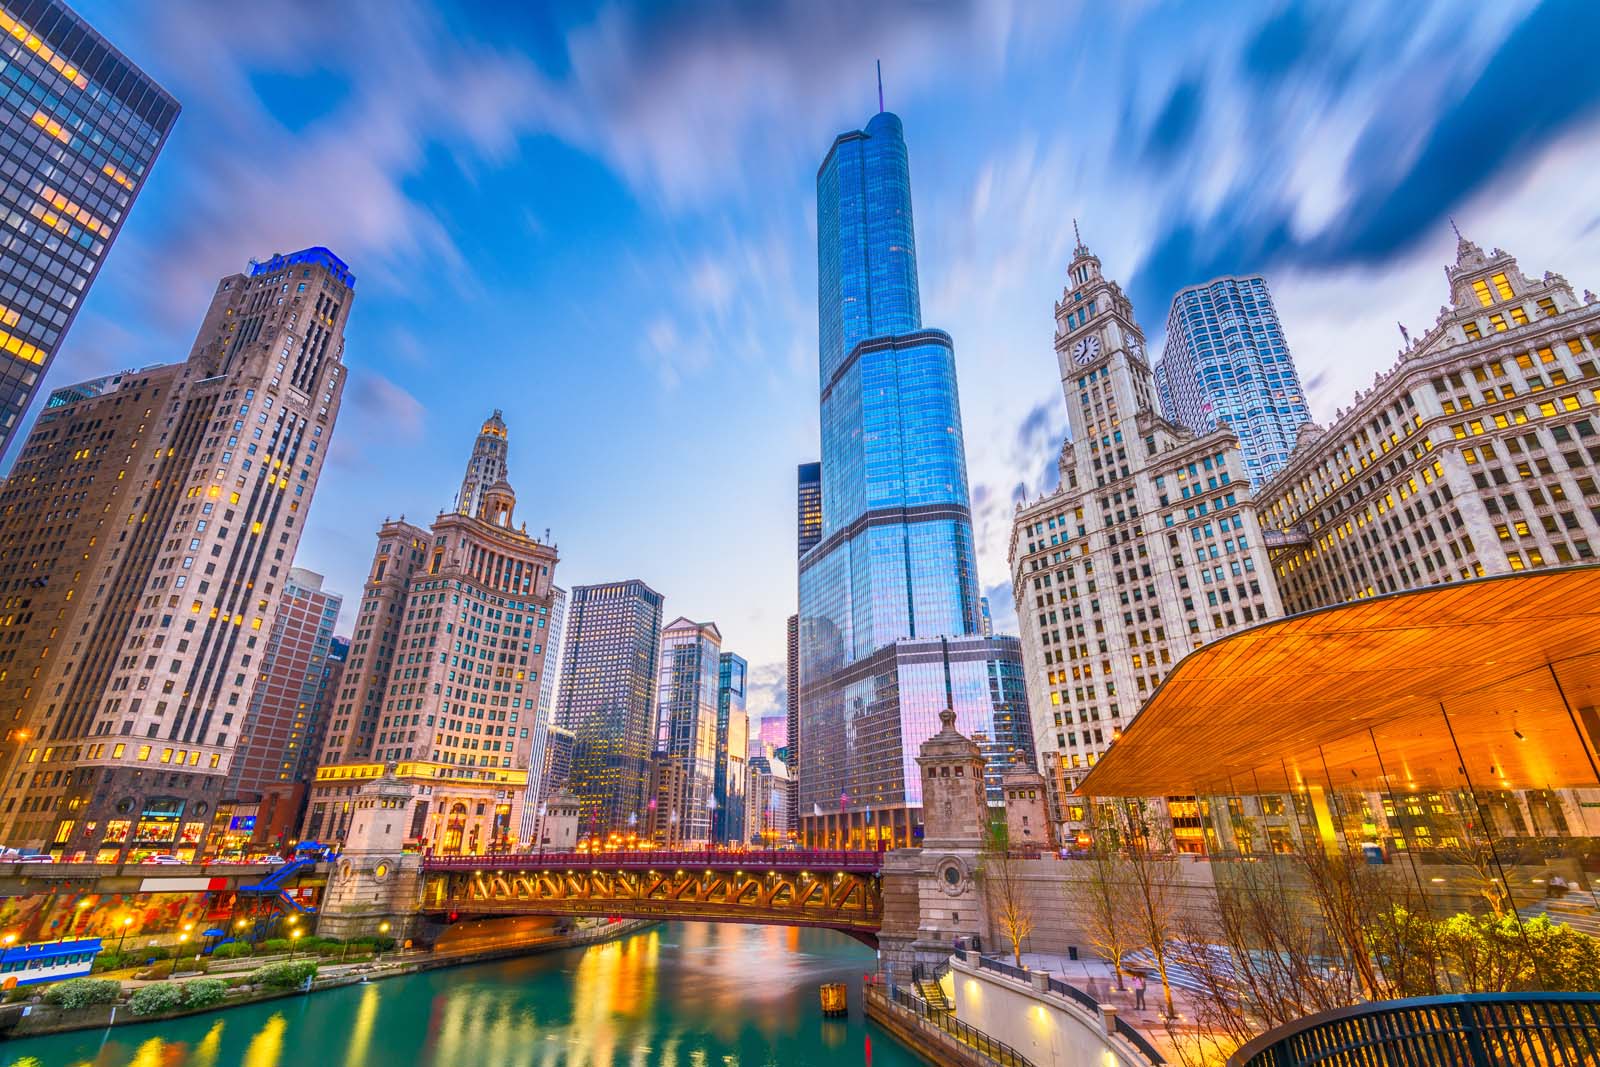 Where to stay in Chicago: Best Areas and Hotels for 2022